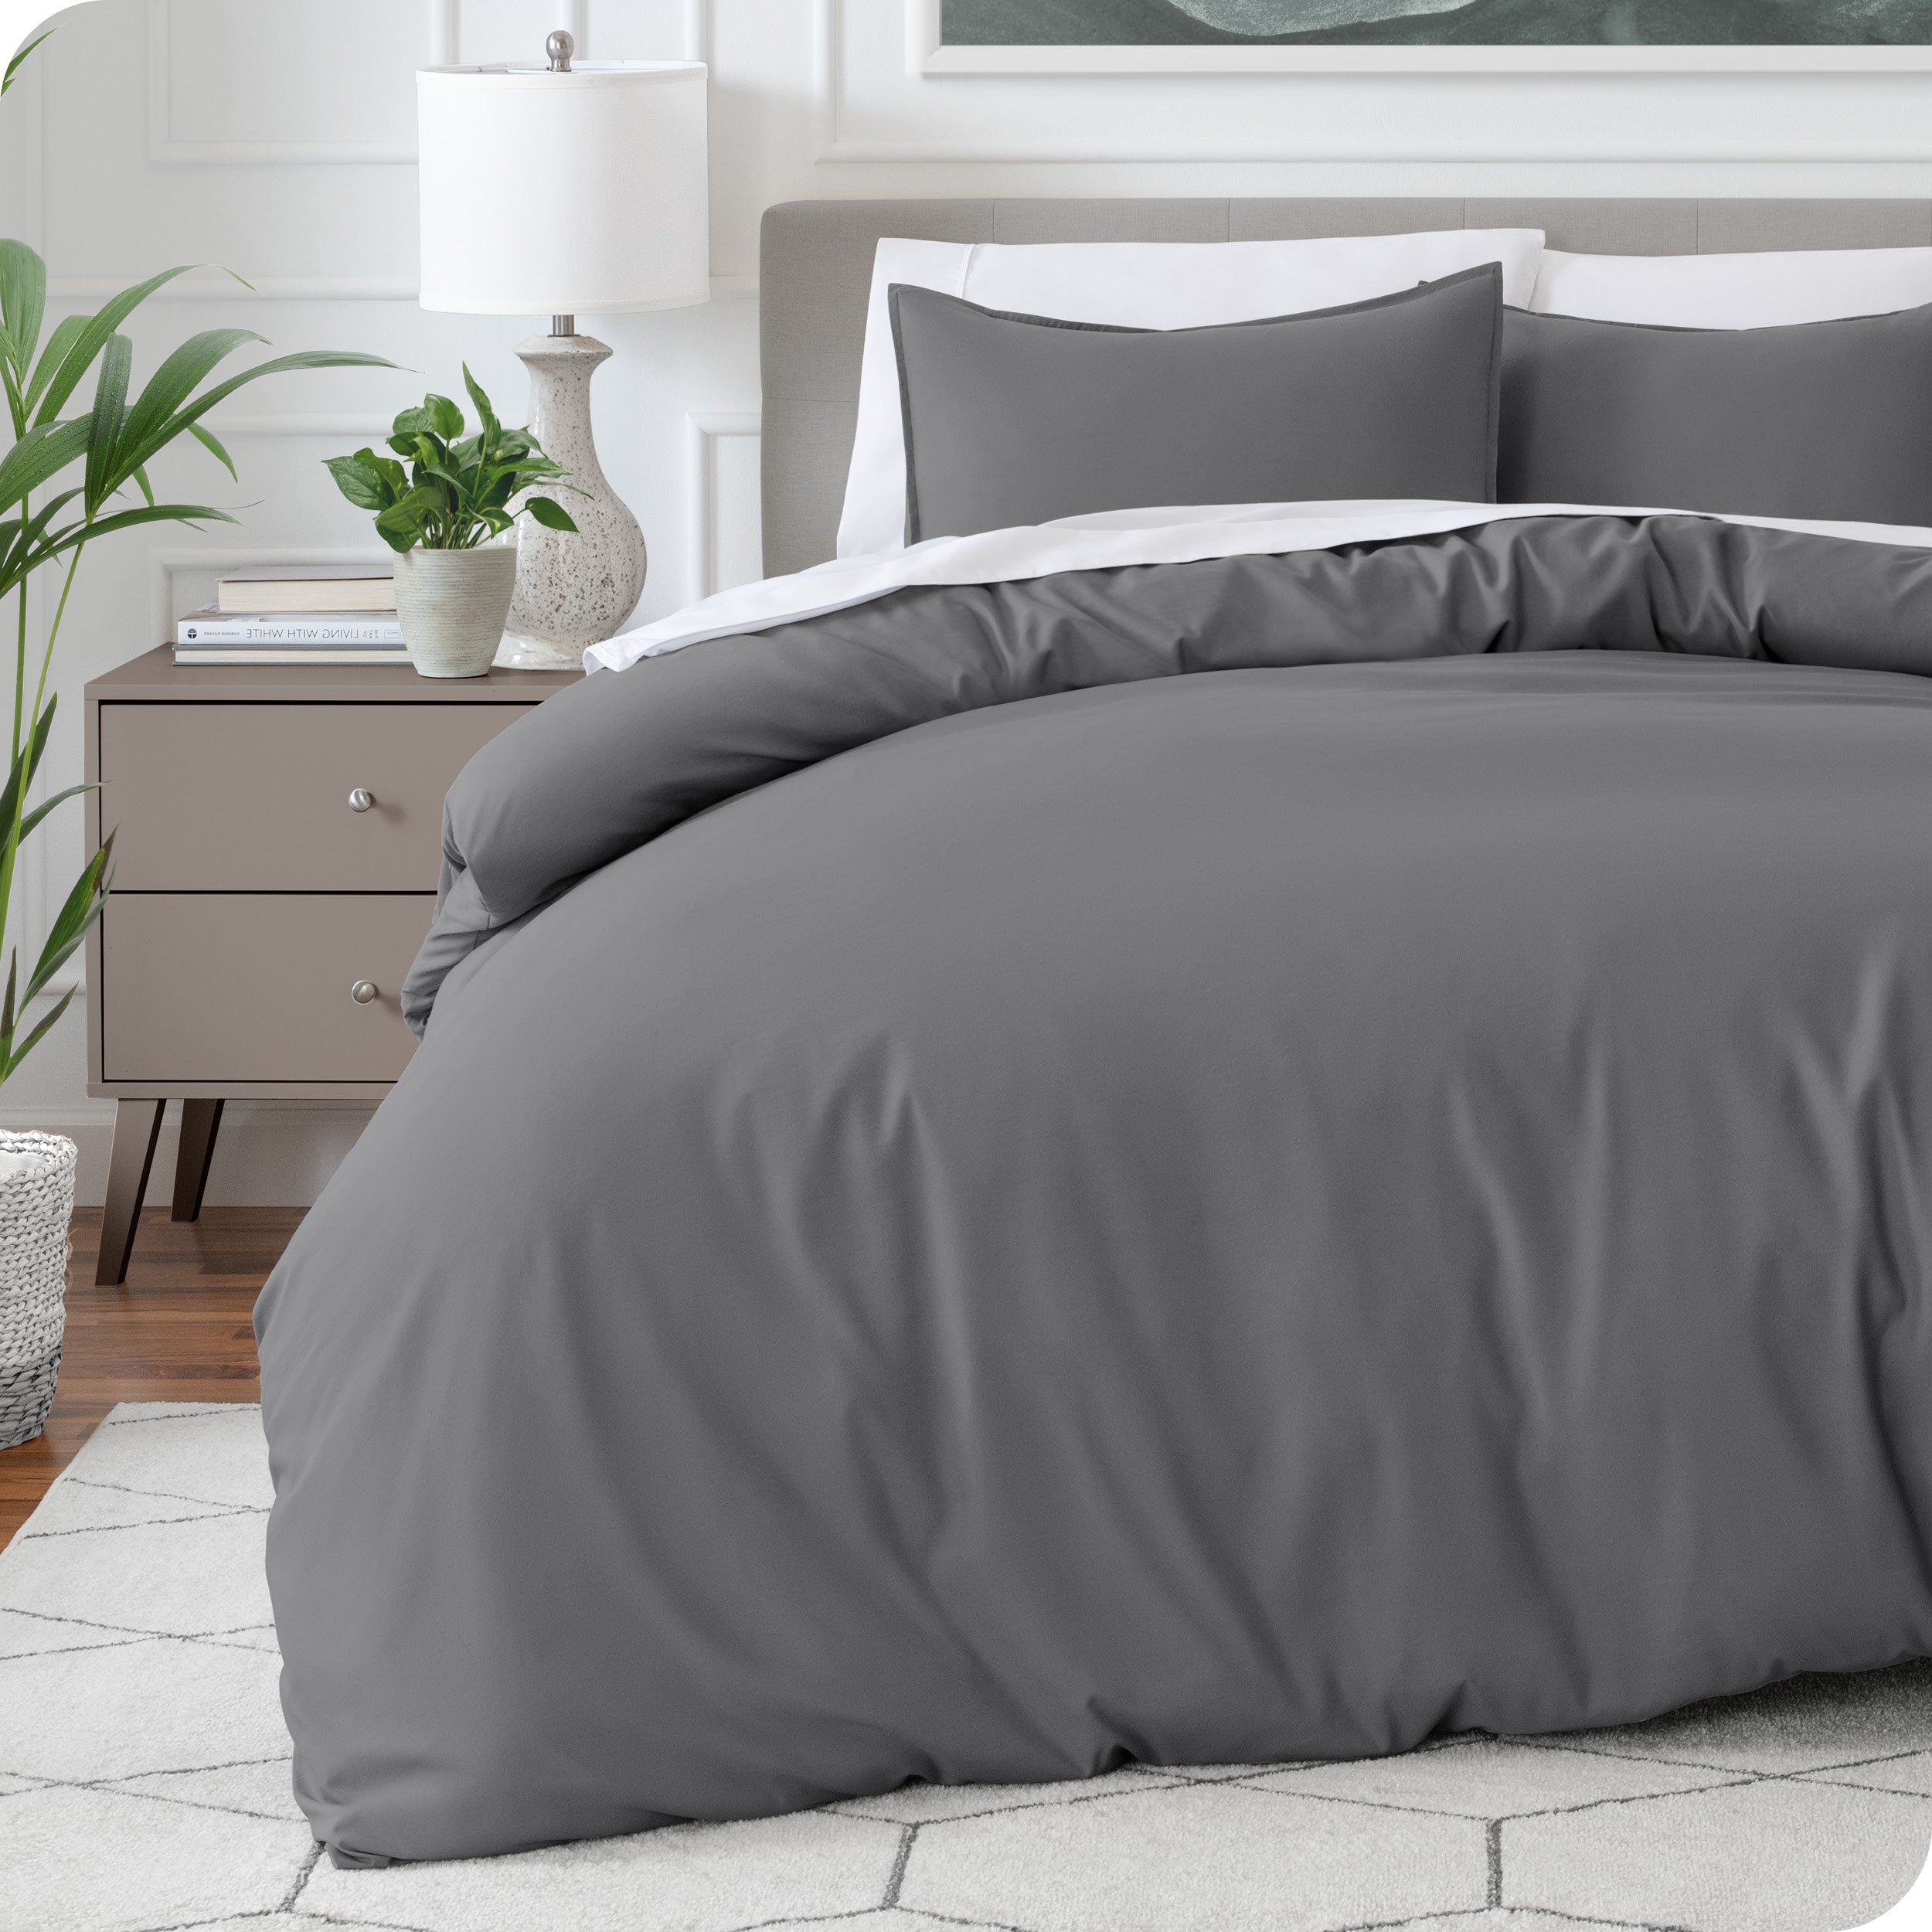 Modern bedroom with a microfiber duvet cover on the bed